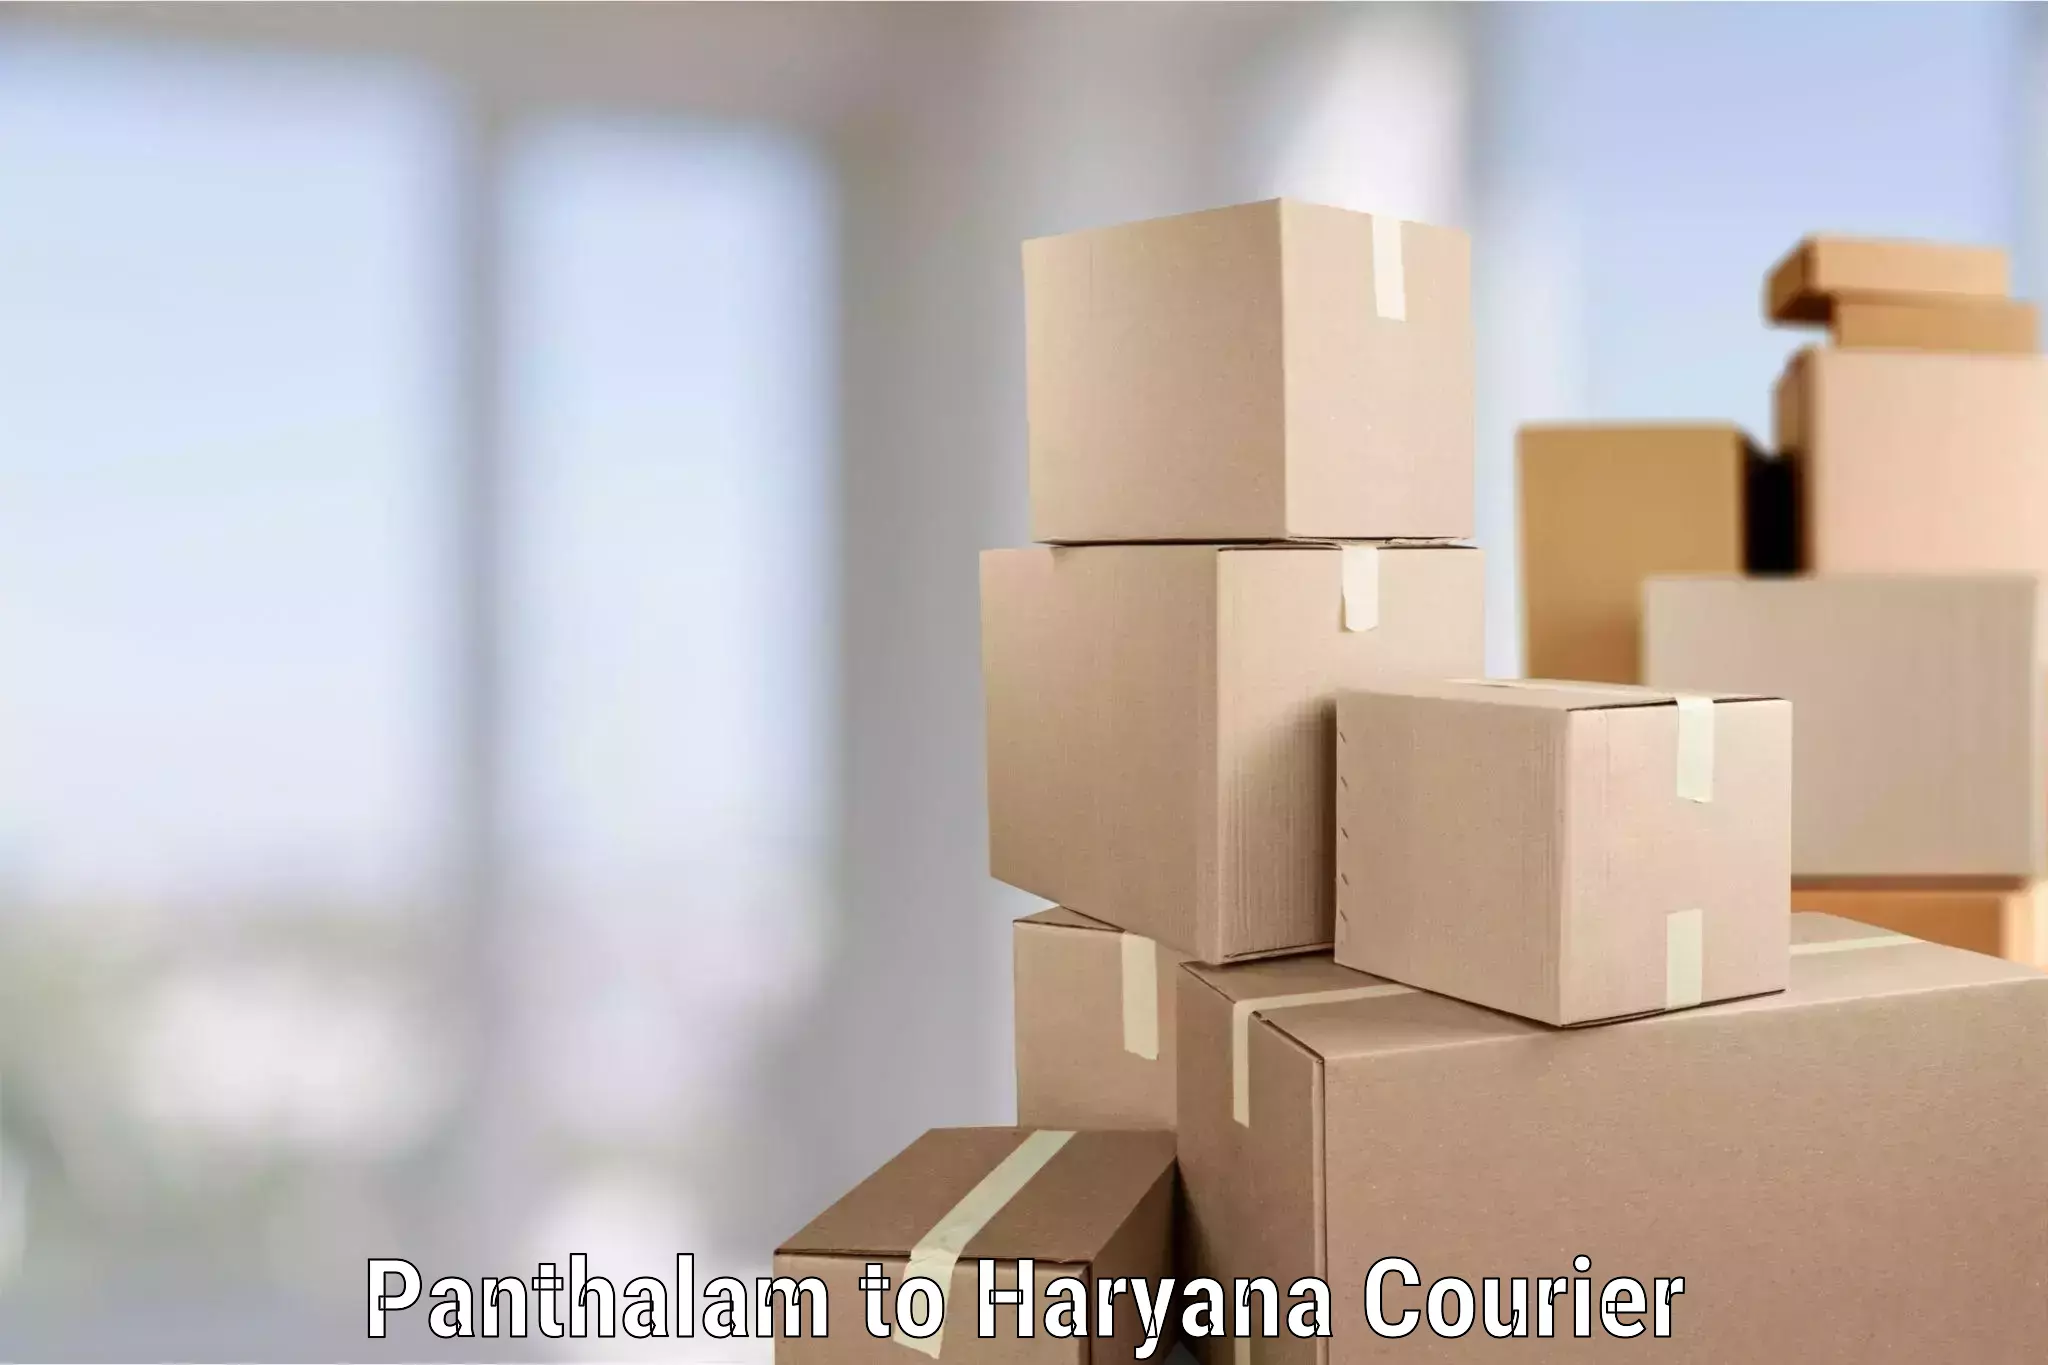 Efficient relocation services Panthalam to Pinjore